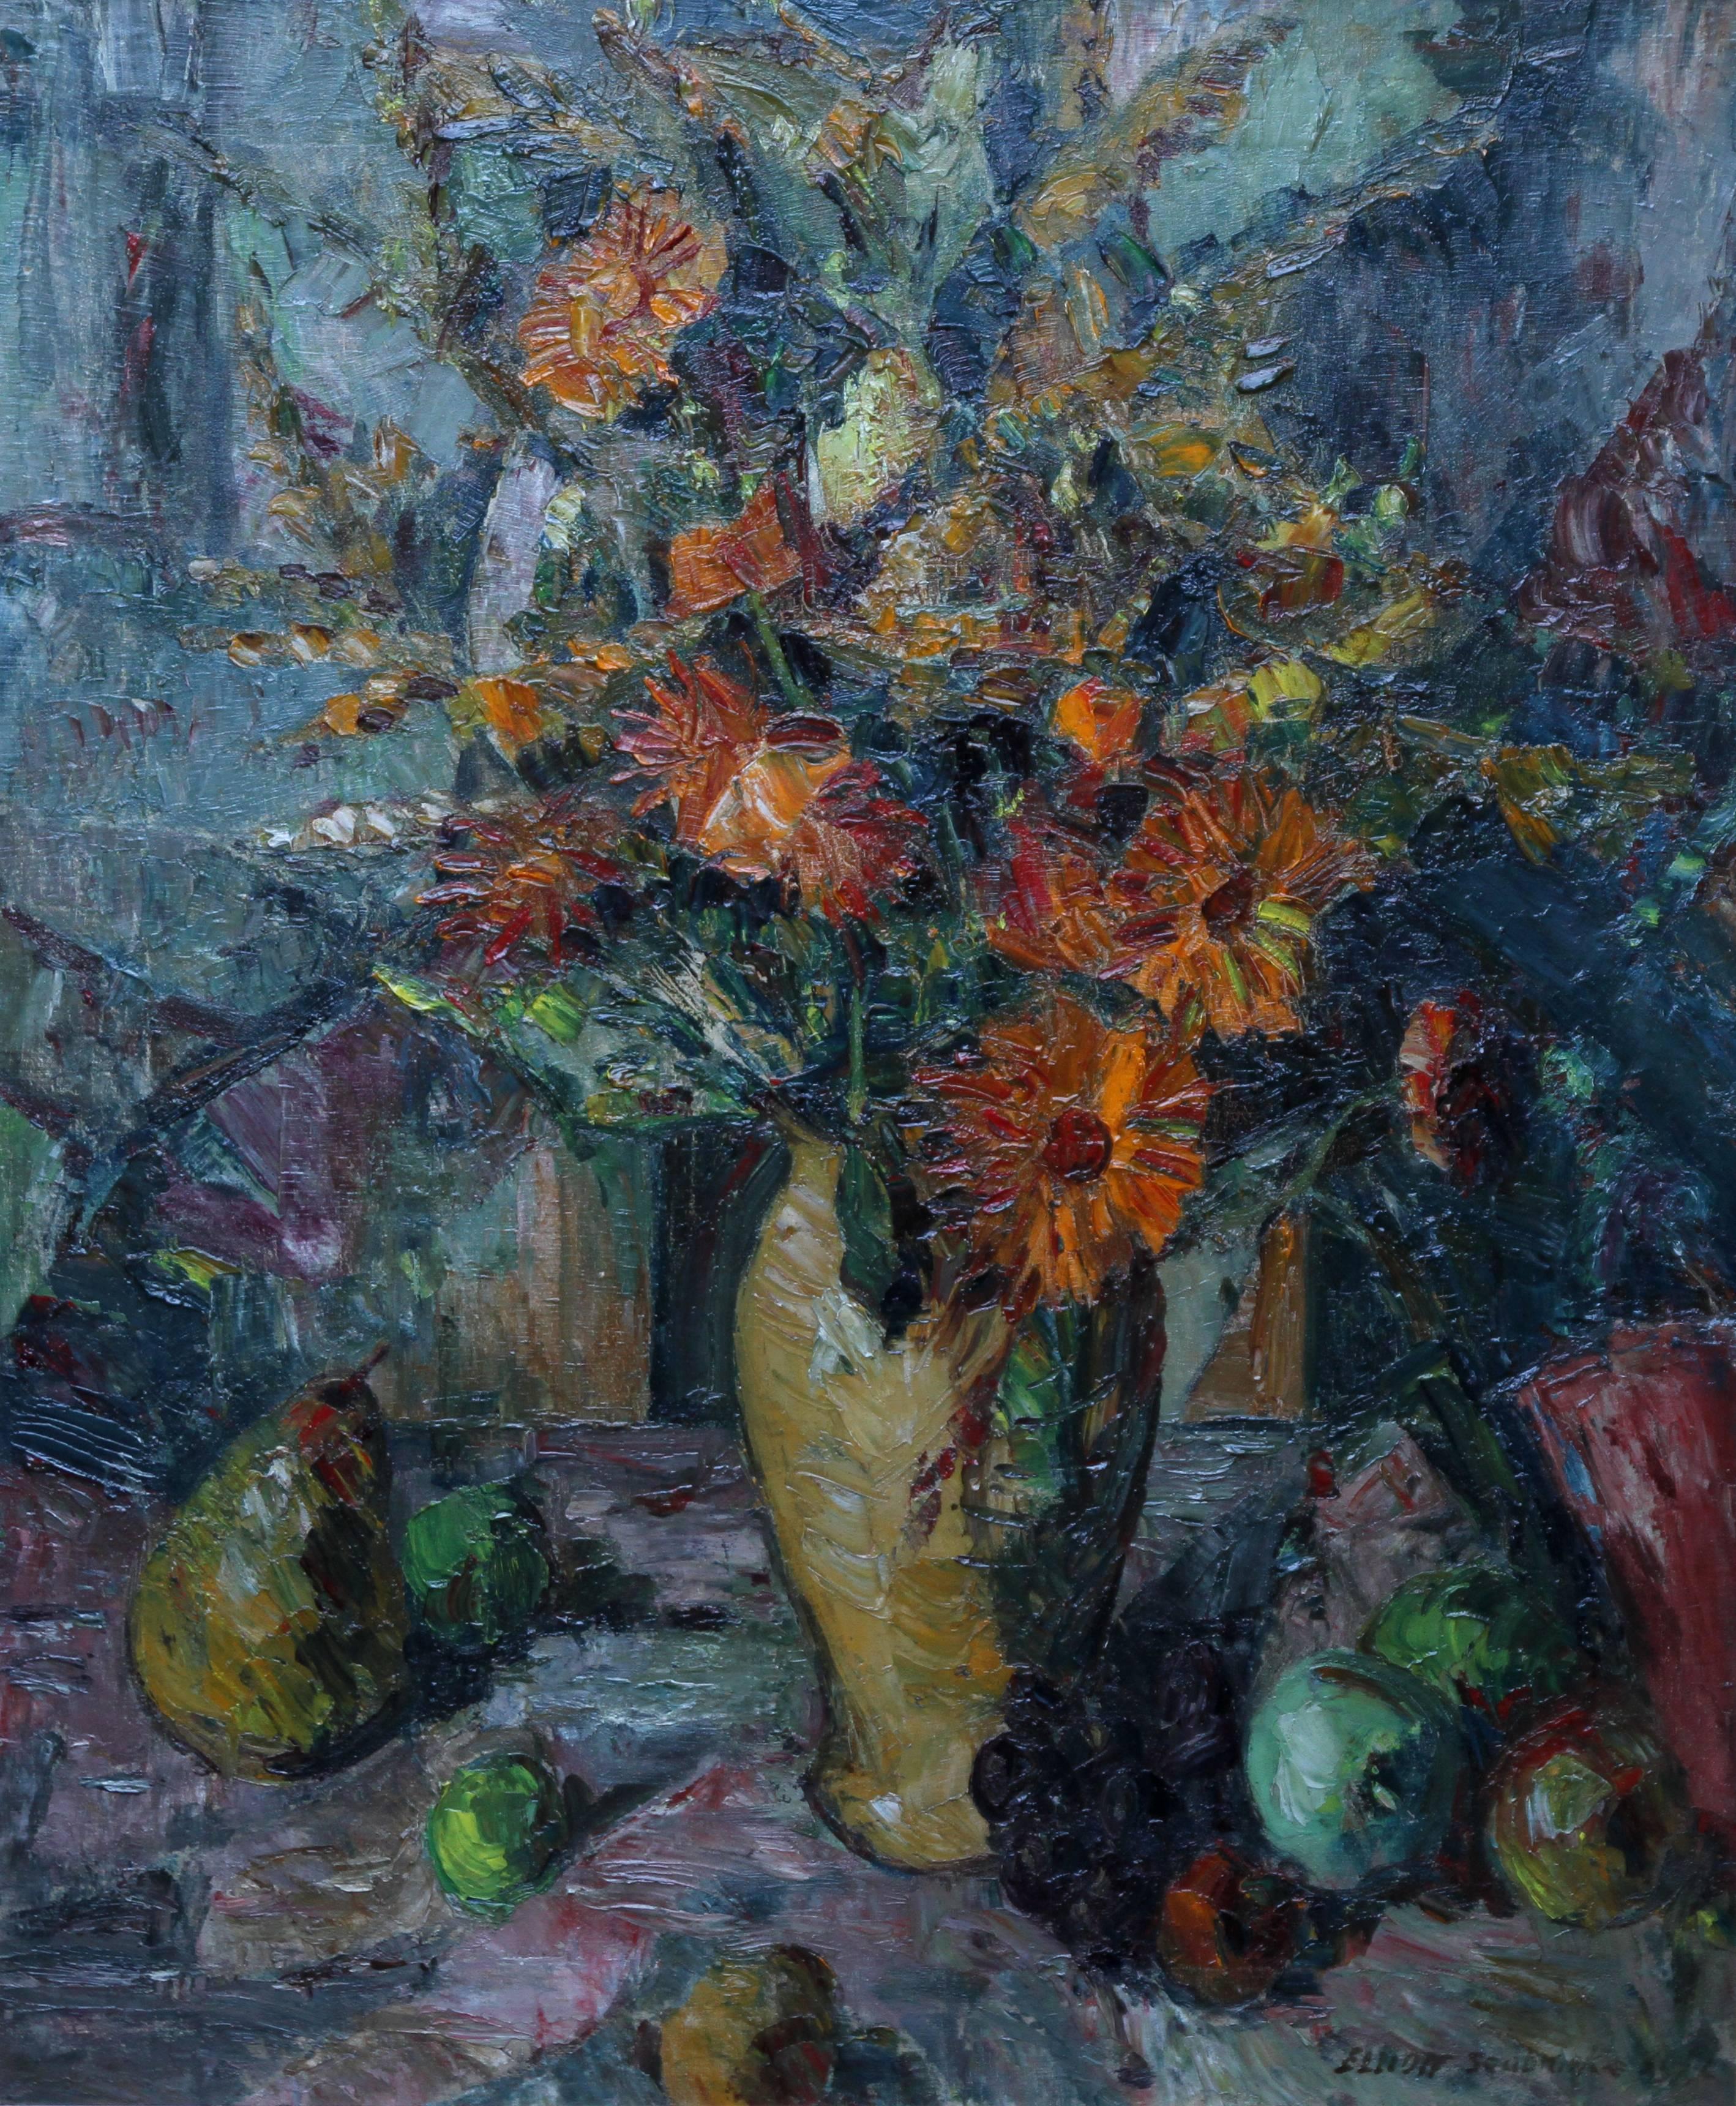 Floral Bouquet - Post Impressionist 20's British art Cezanne style oil painting  - Painting by Elliott Seabrooke